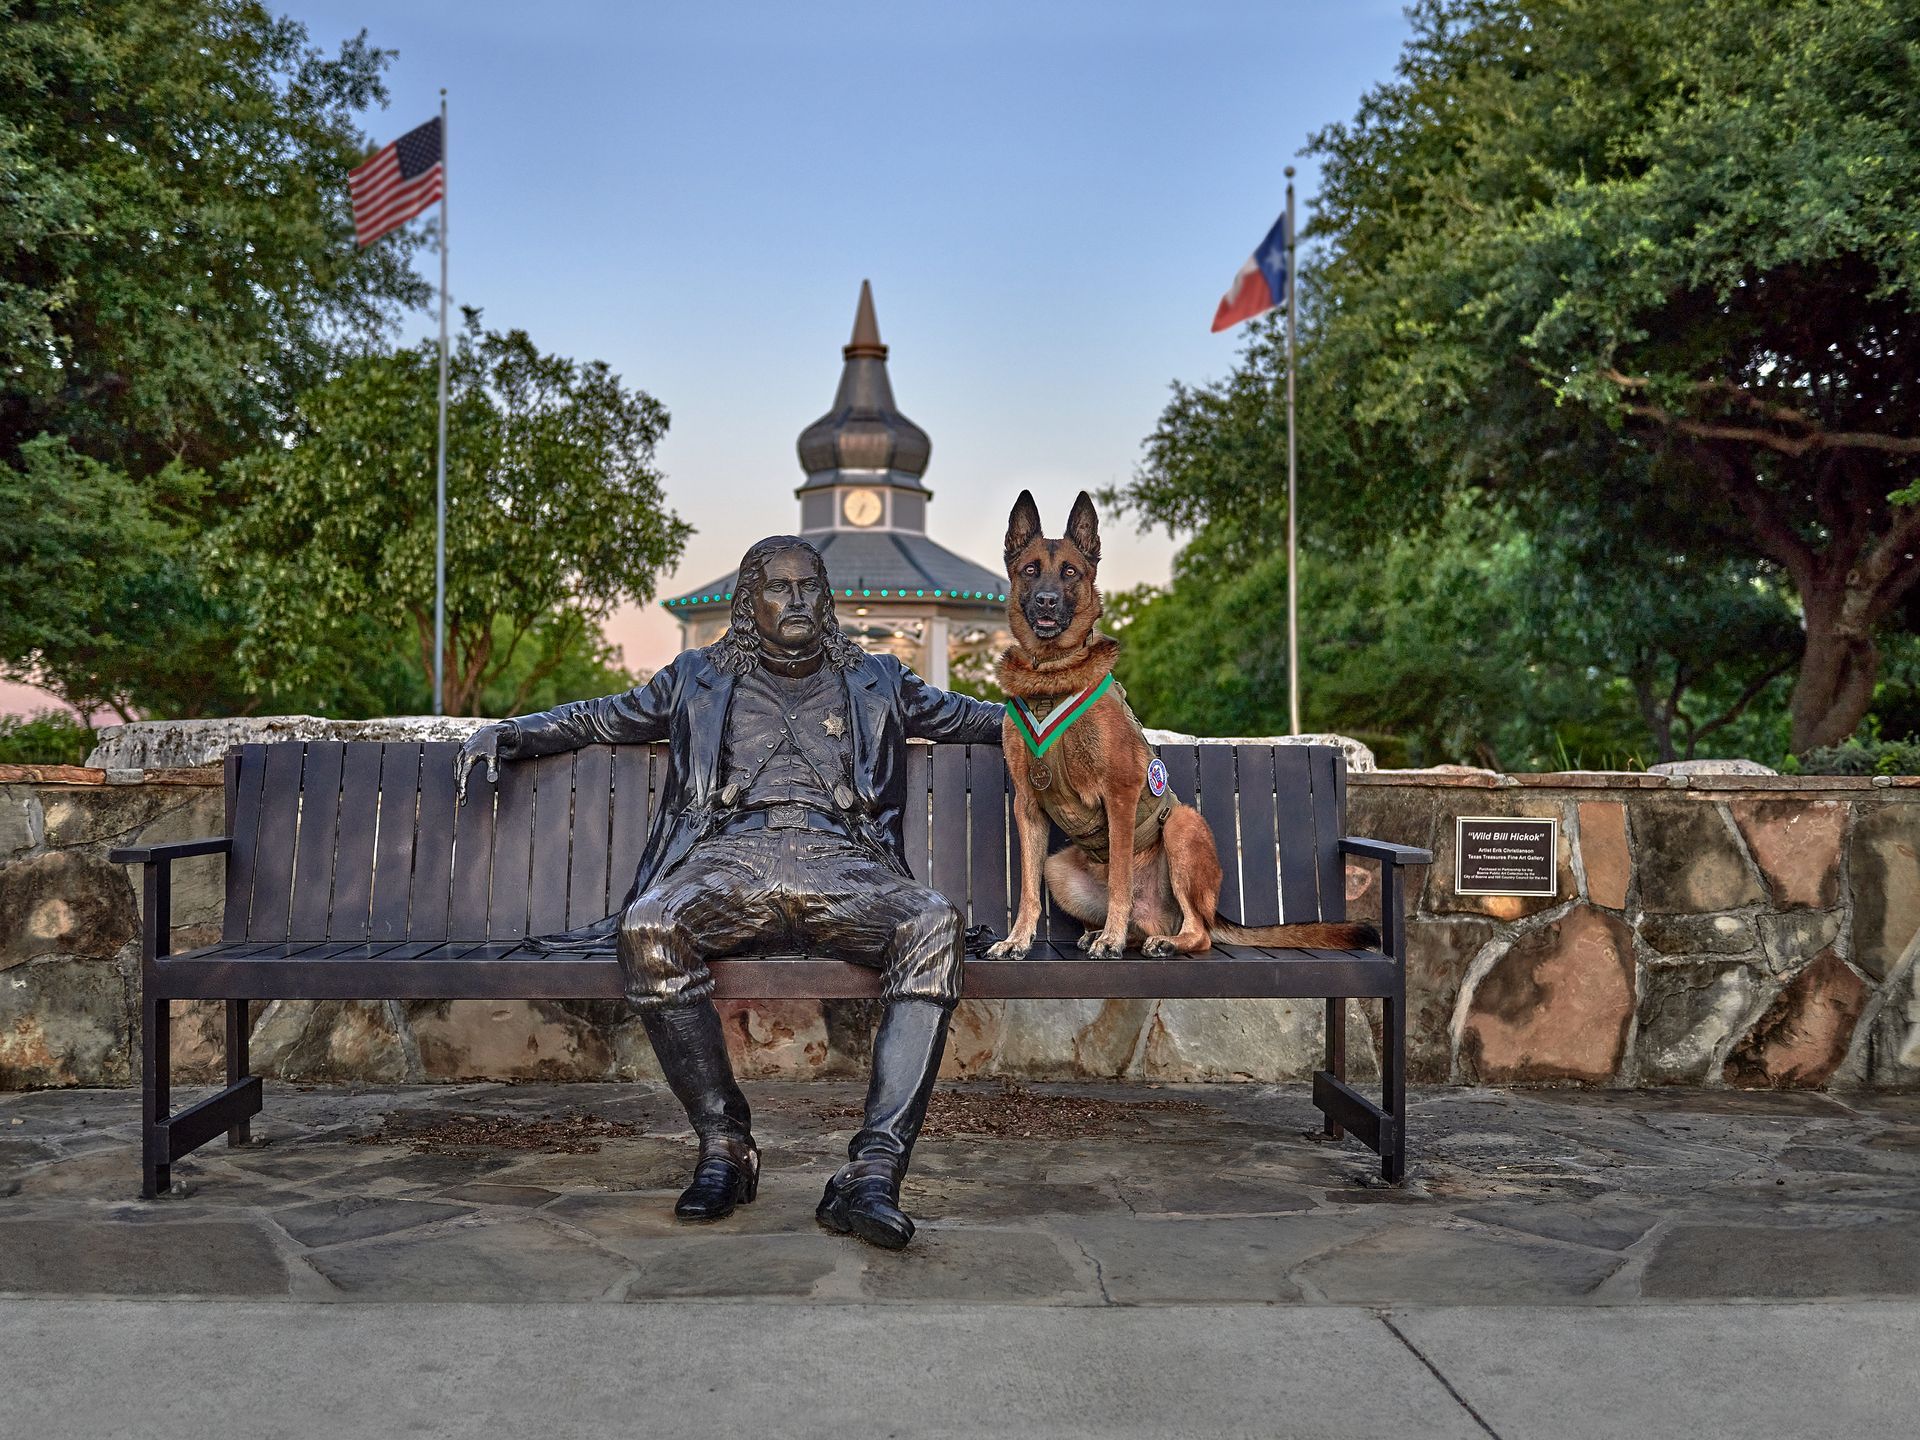 A statue of a man and a dog sitting on a bench